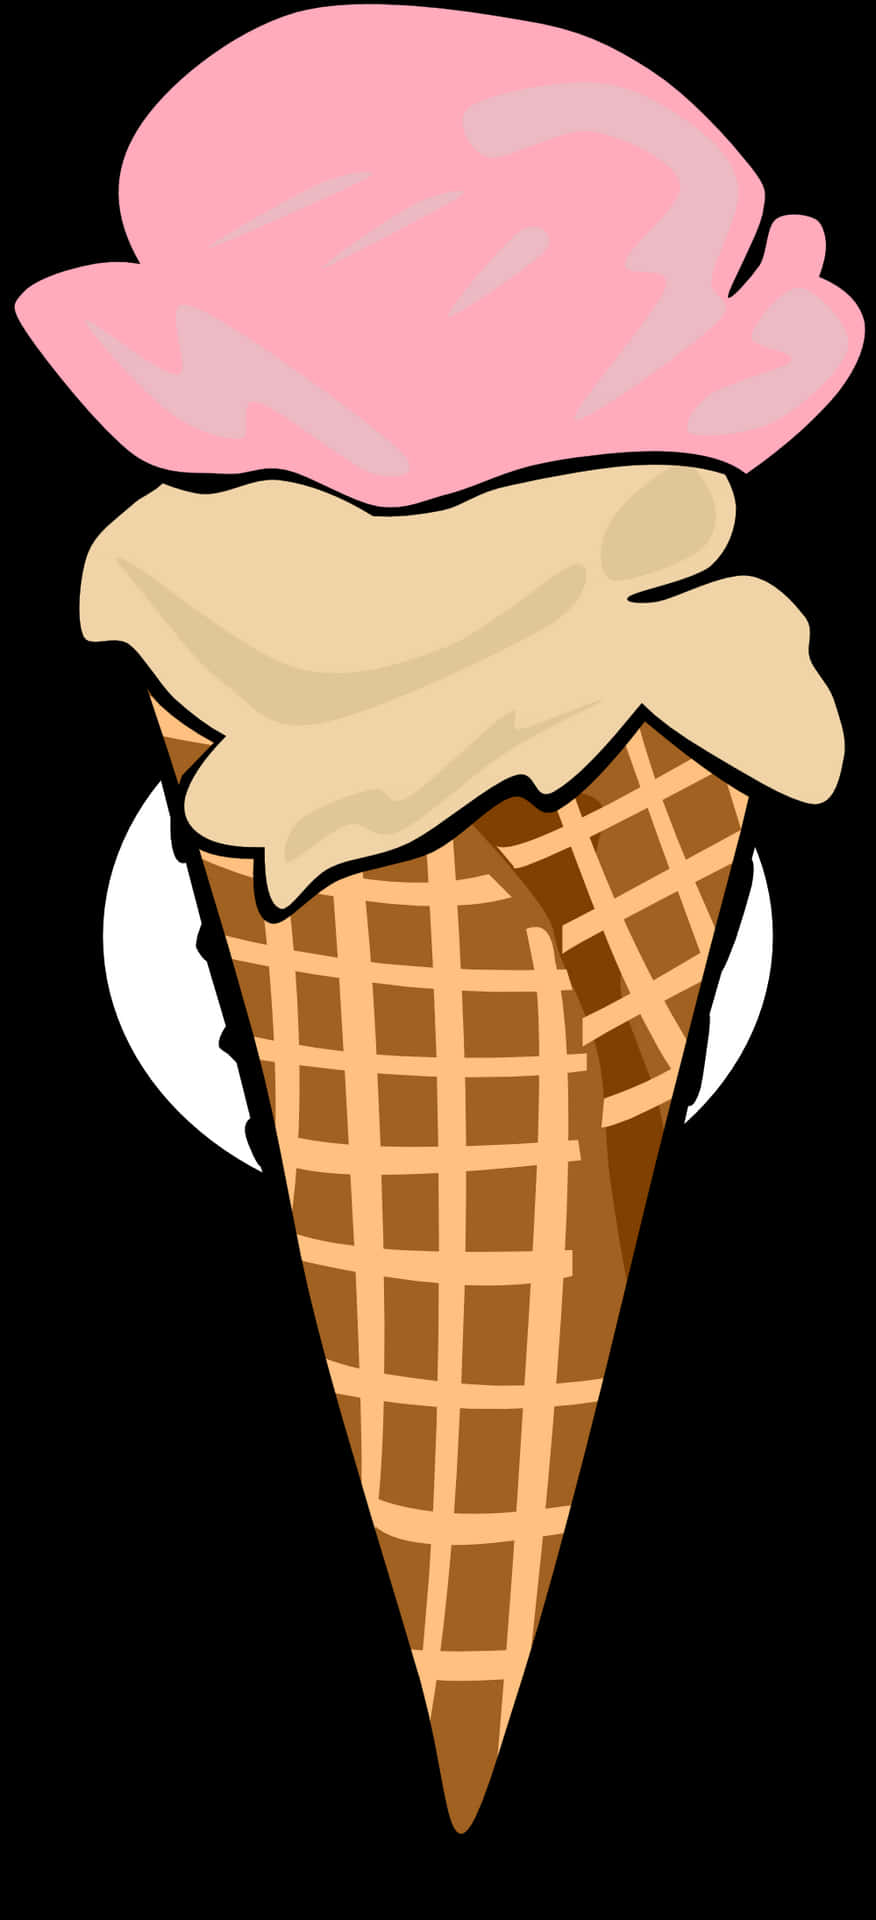 Strawberry Ice Cream Cone Clipart PNG image